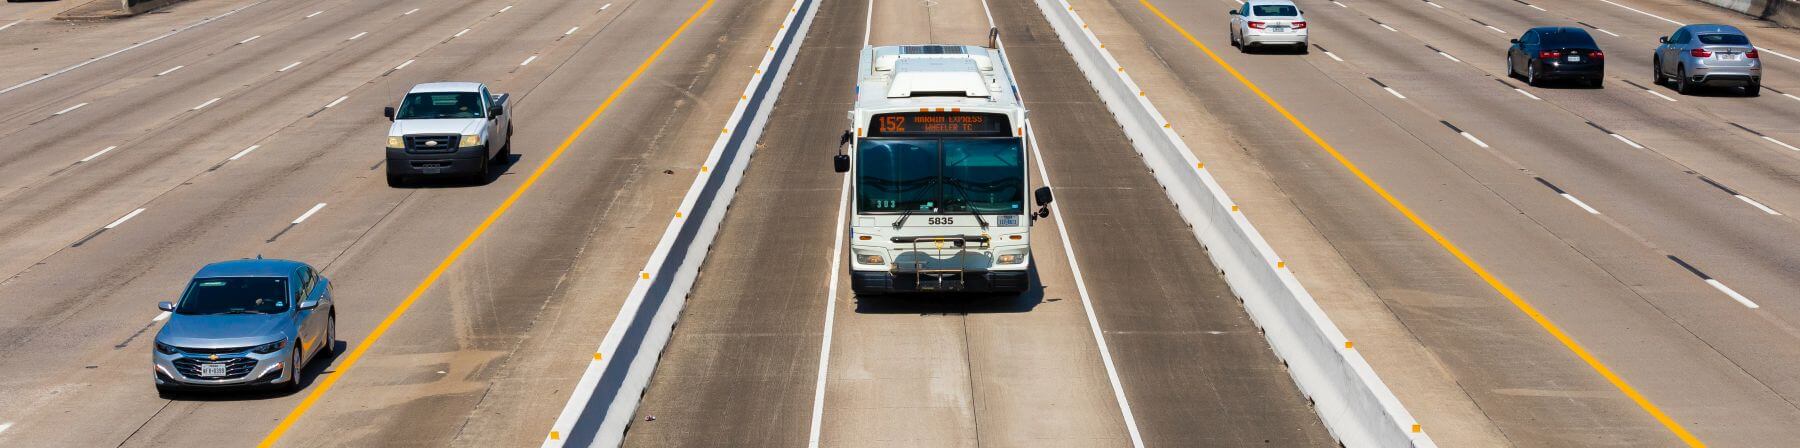 152 Harwin Express bus in Highway 59 North HOV express lane